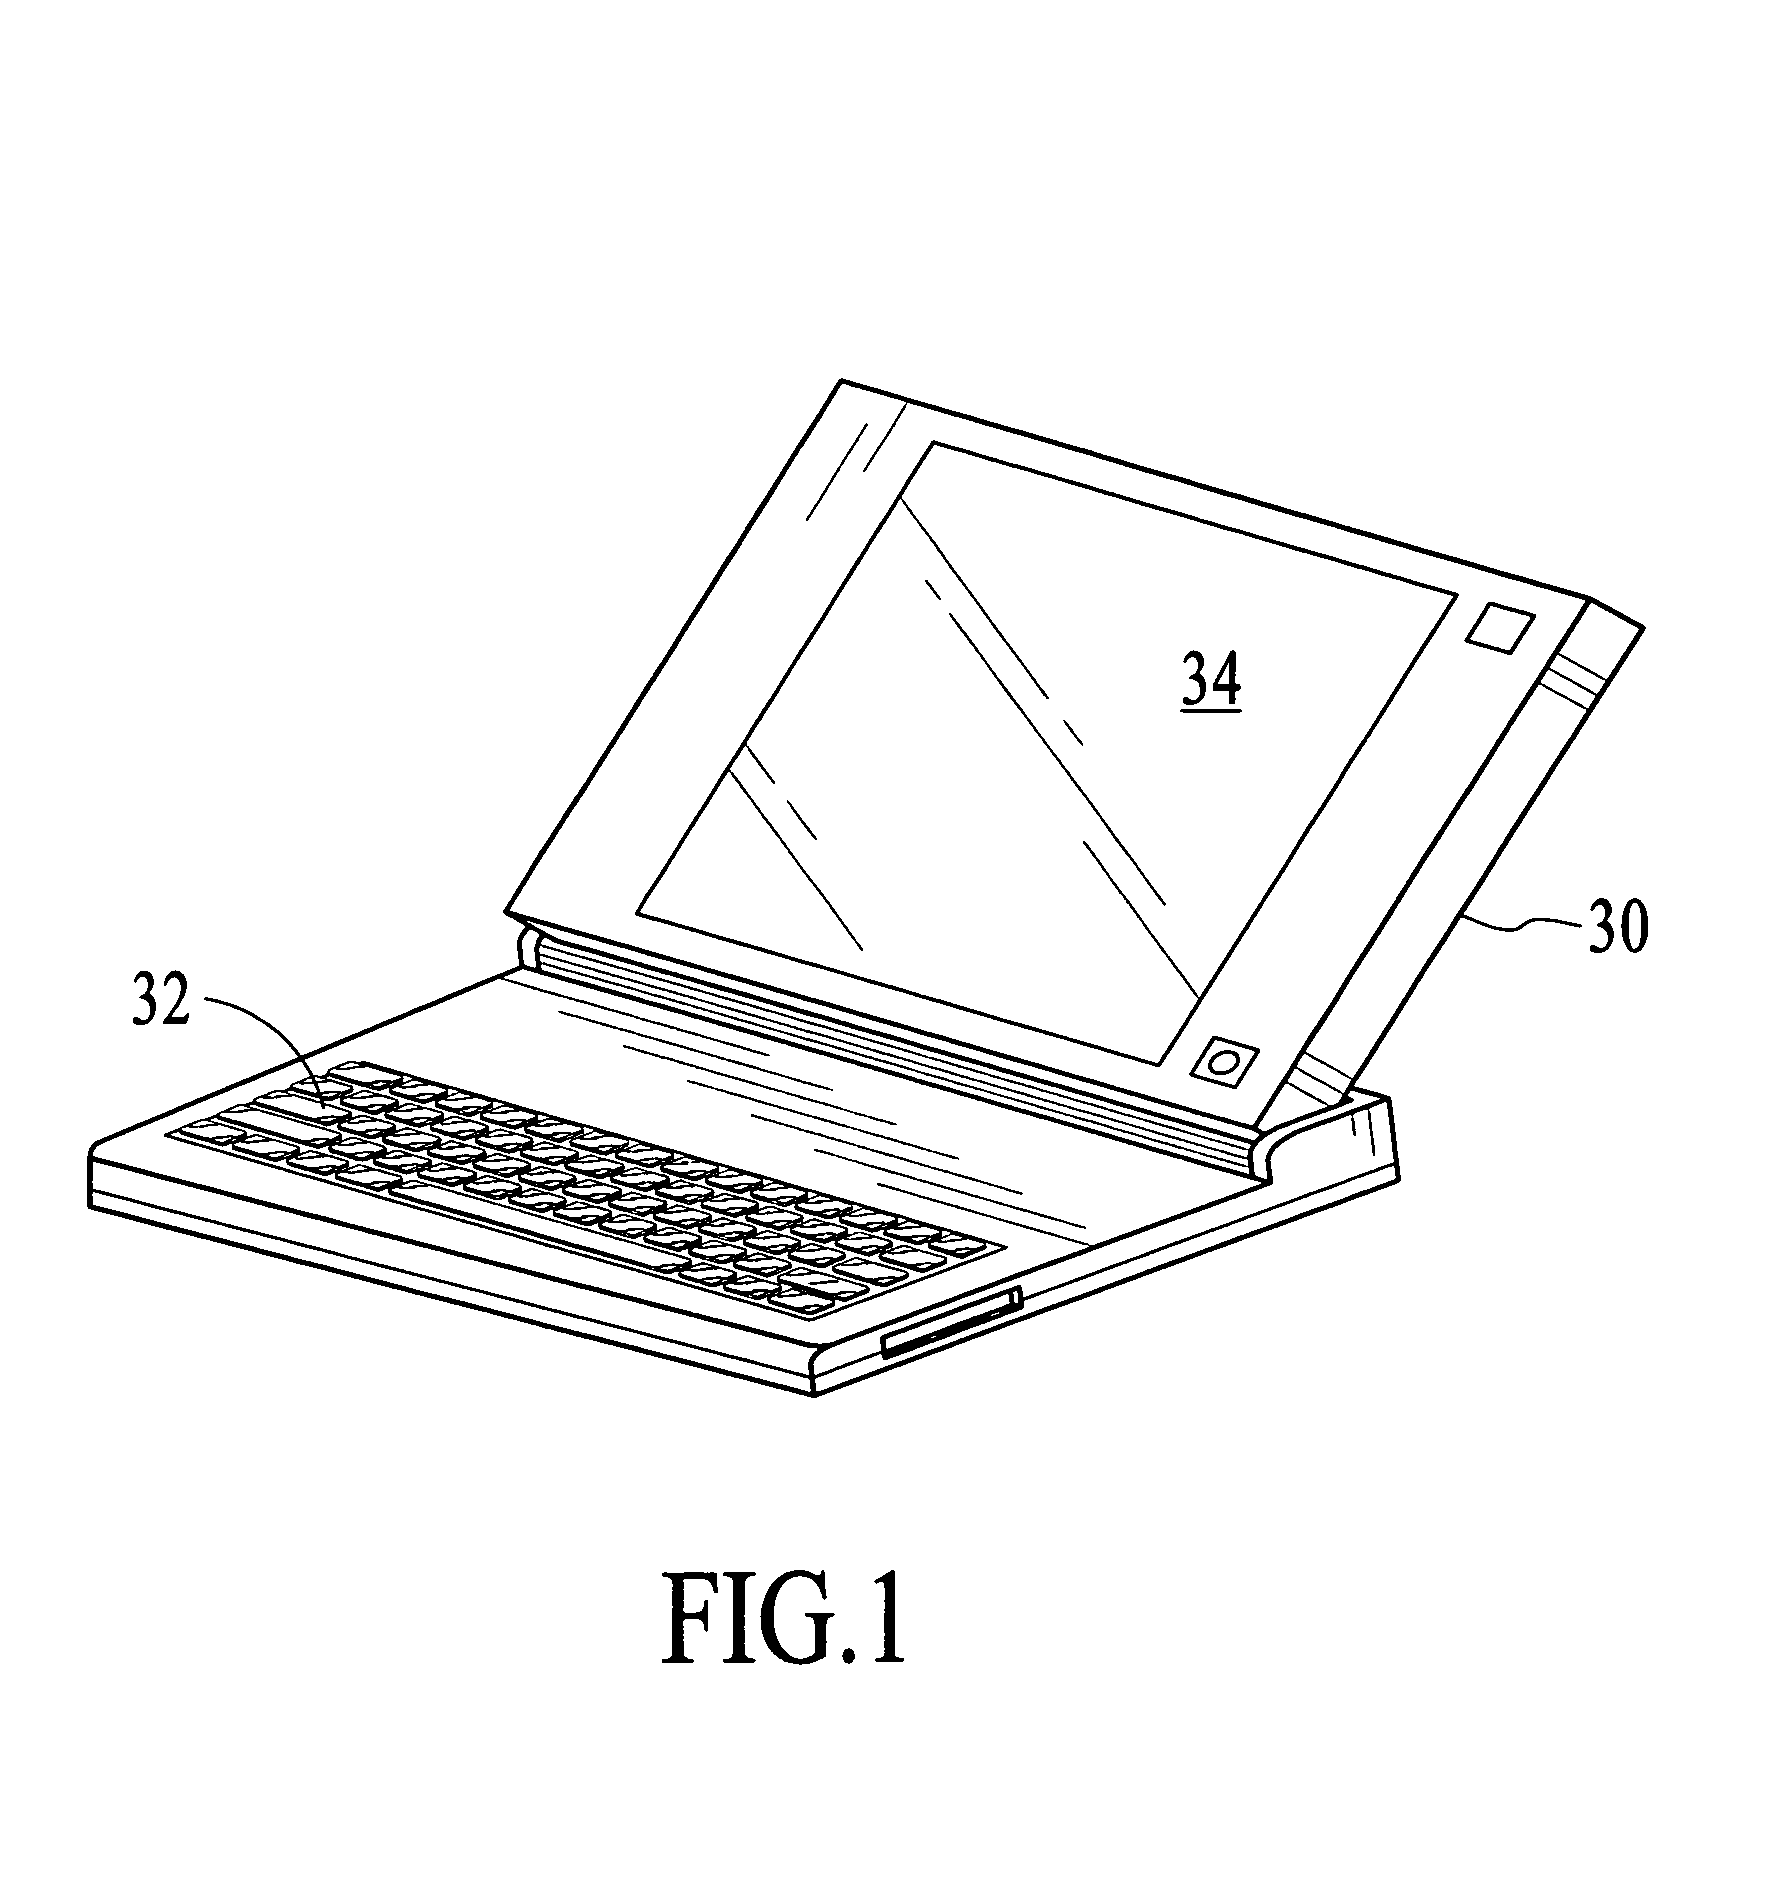 Method and system for providing protection against theft and loss of a portable computer system